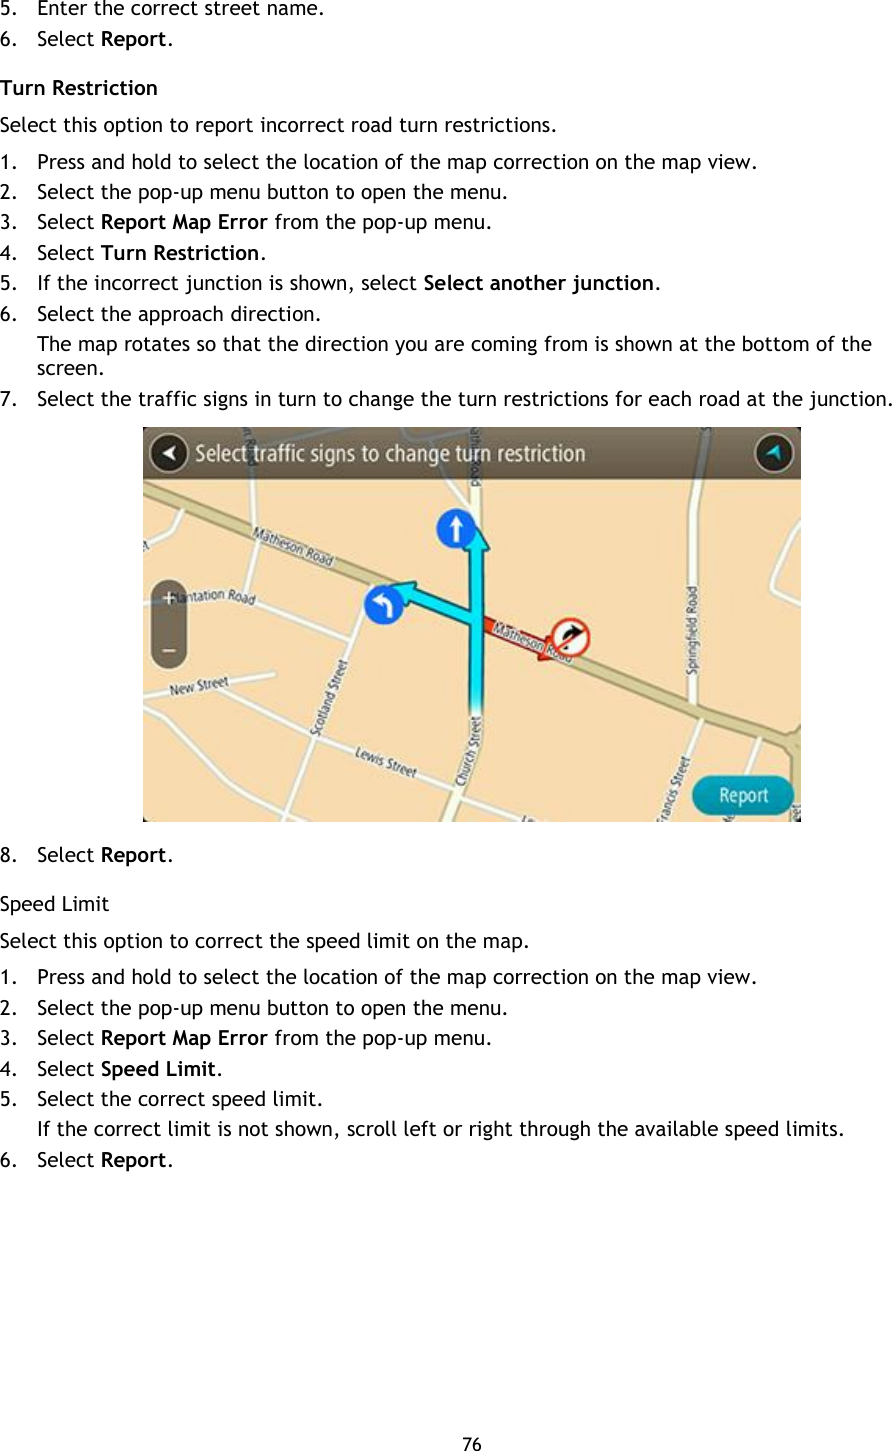 76    5. Enter the correct street name. 6. Select Report. Turn Restriction Select this option to report incorrect road turn restrictions. 1. Press and hold to select the location of the map correction on the map view. 2. Select the pop-up menu button to open the menu. 3. Select Report Map Error from the pop-up menu. 4. Select Turn Restriction. 5. If the incorrect junction is shown, select Select another junction.   6. Select the approach direction. The map rotates so that the direction you are coming from is shown at the bottom of the screen. 7. Select the traffic signs in turn to change the turn restrictions for each road at the junction.  8. Select Report. Speed Limit Select this option to correct the speed limit on the map.   1. Press and hold to select the location of the map correction on the map view. 2. Select the pop-up menu button to open the menu. 3. Select Report Map Error from the pop-up menu. 4. Select Speed Limit. 5. Select the correct speed limit.   If the correct limit is not shown, scroll left or right through the available speed limits.   6. Select Report. 